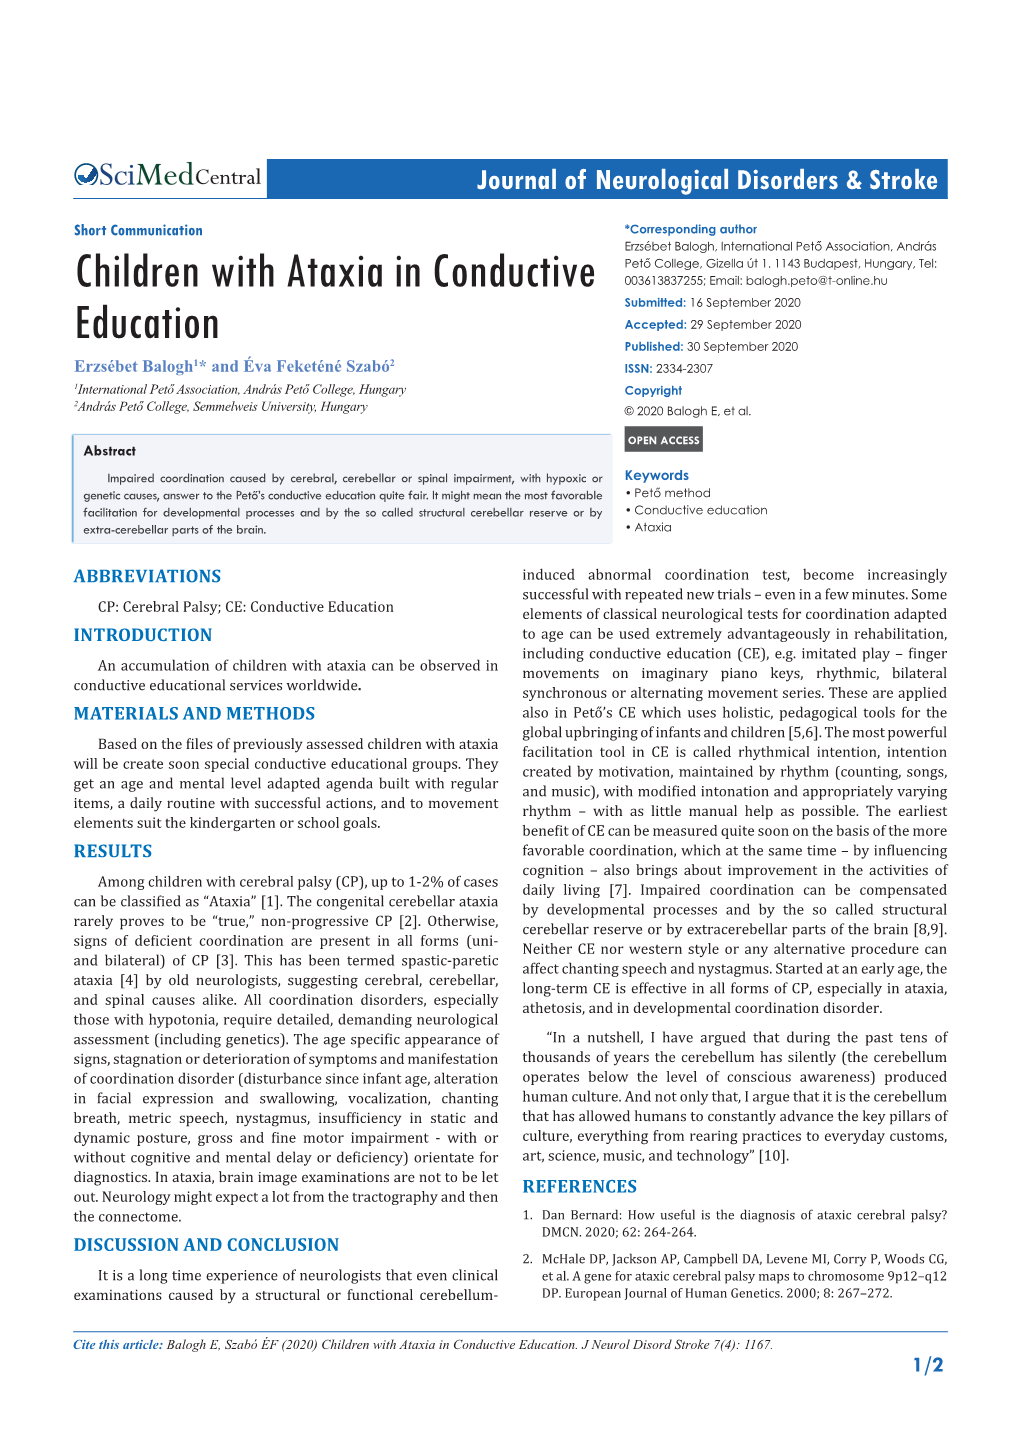 Children with Ataxia in Conductive Education